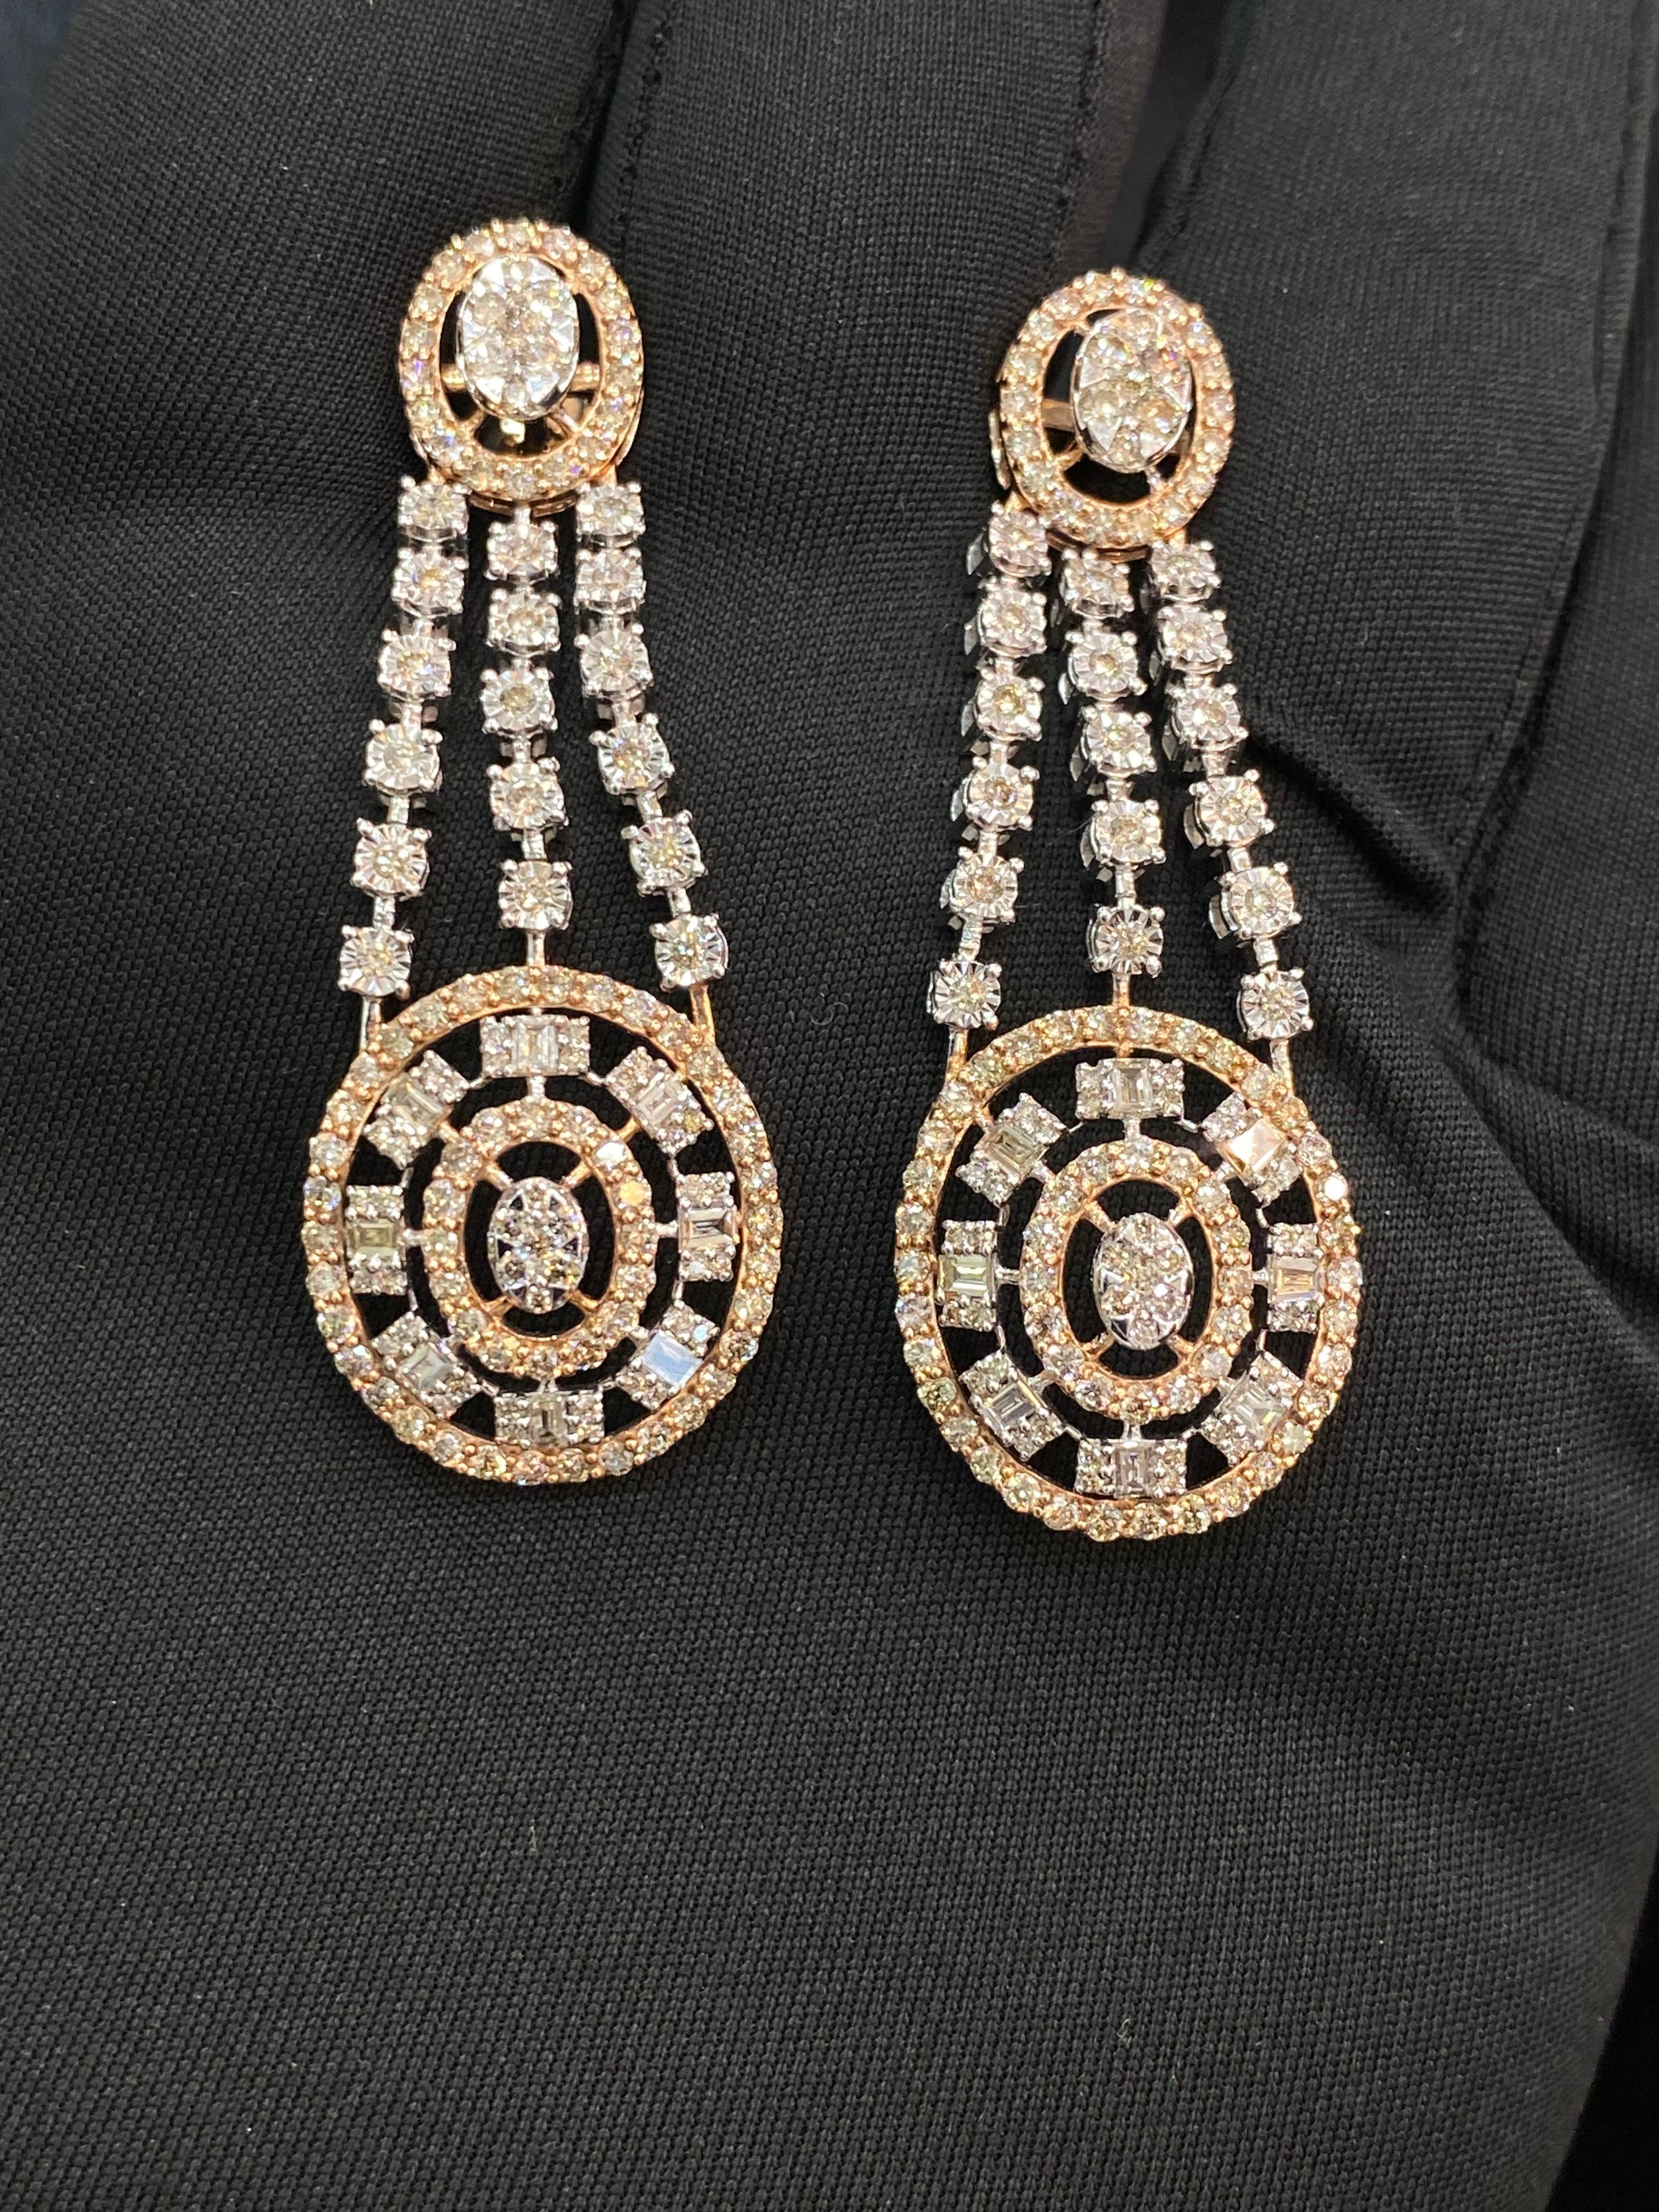 Round Cut 3.63 Cts F/VS1 Round Baguette Natural Diamonds Dangle Earrings 14K Two-Tone Gold For Sale